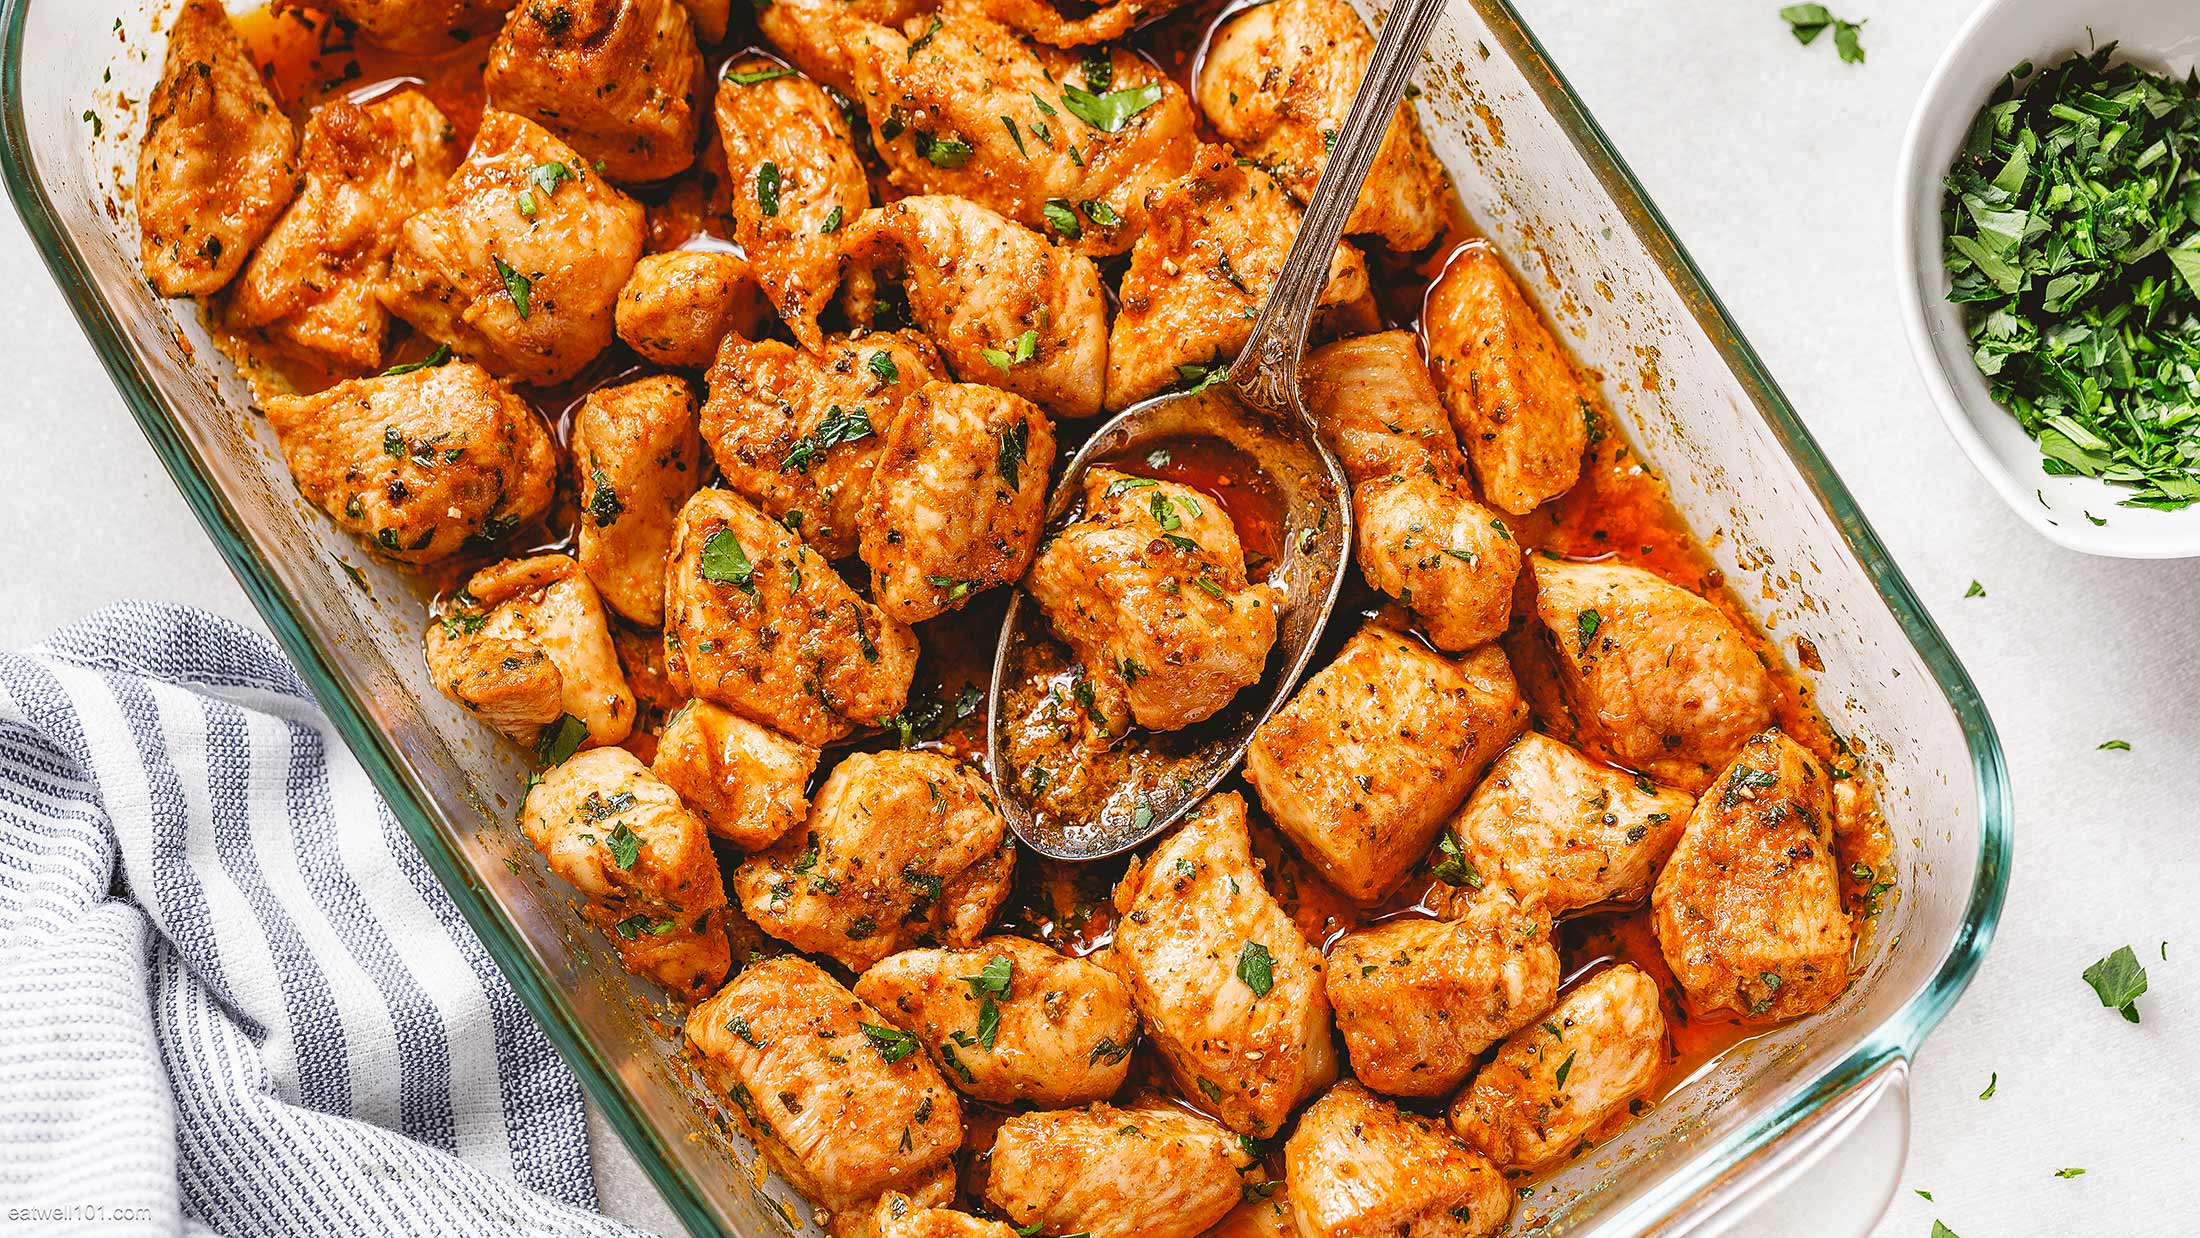 Oven Baked Chicken Bites - #recipe by #eatwell101